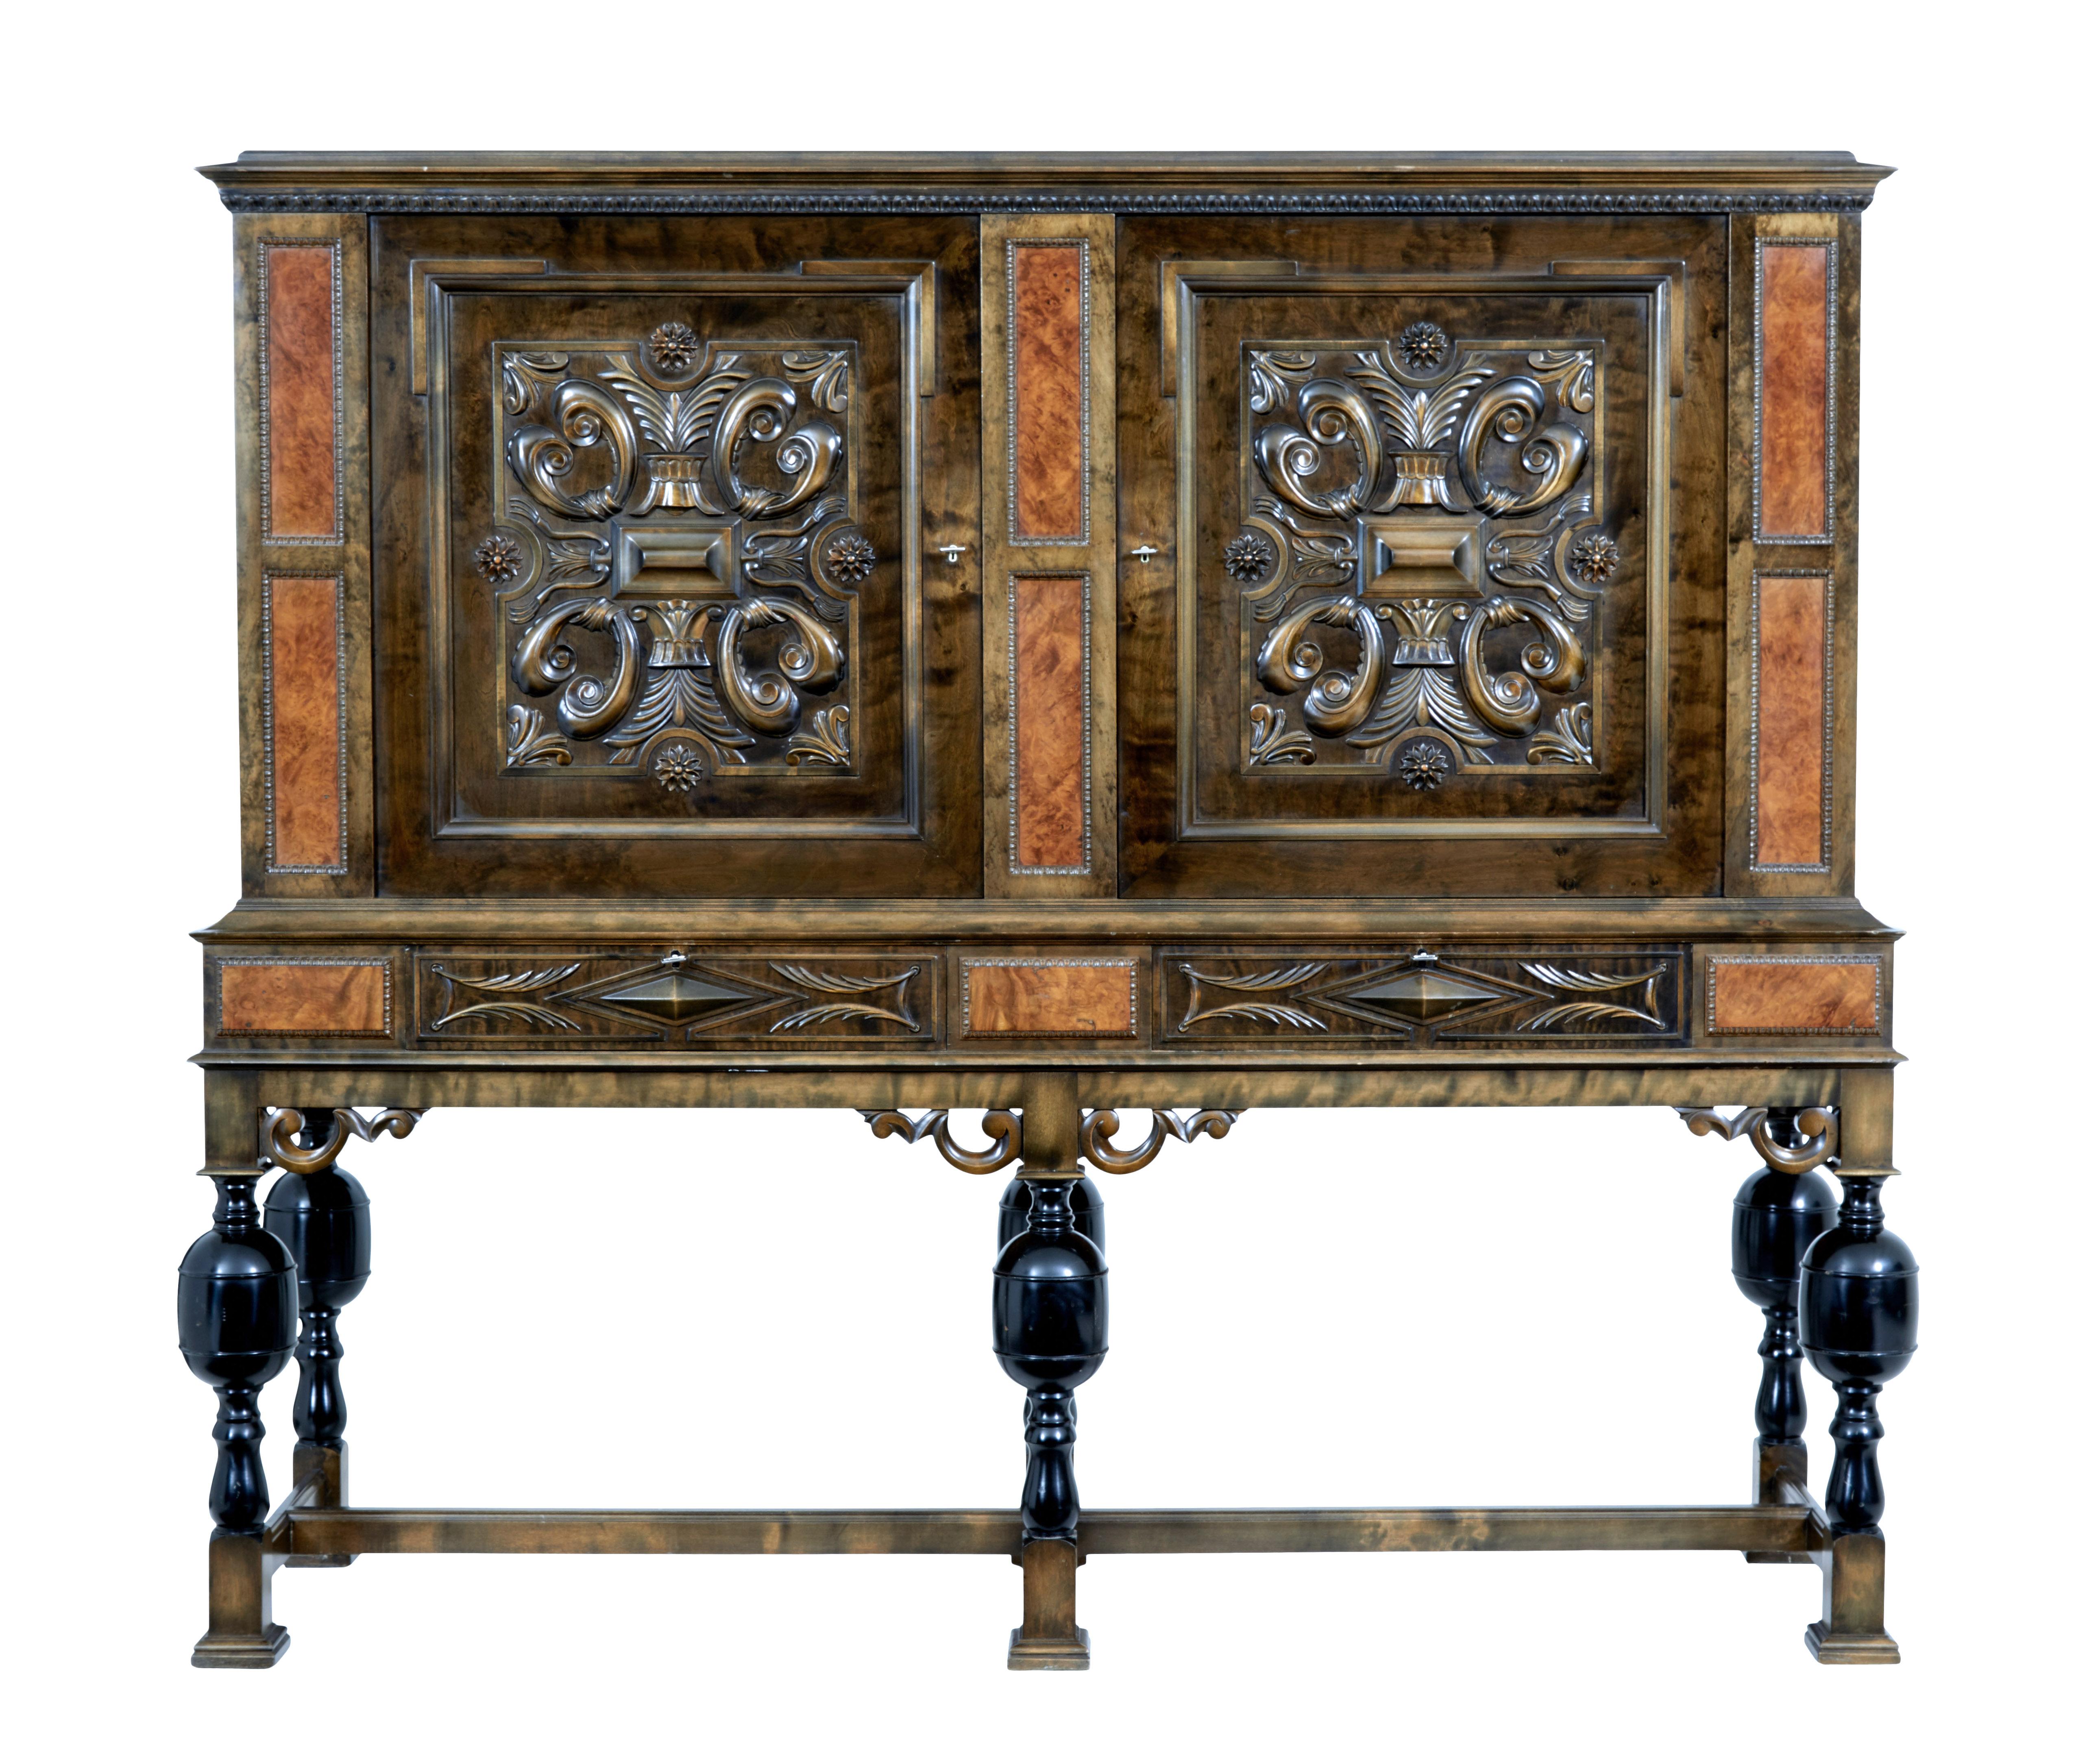 Early 20th century Swedish baroque revival birch cabinet circa 1920.

Here we present a striking dark stained birch cabinet from Sweden. Cornice top with moulded edge underneath. Double door cabinet with applied decorative mouldings of swags and